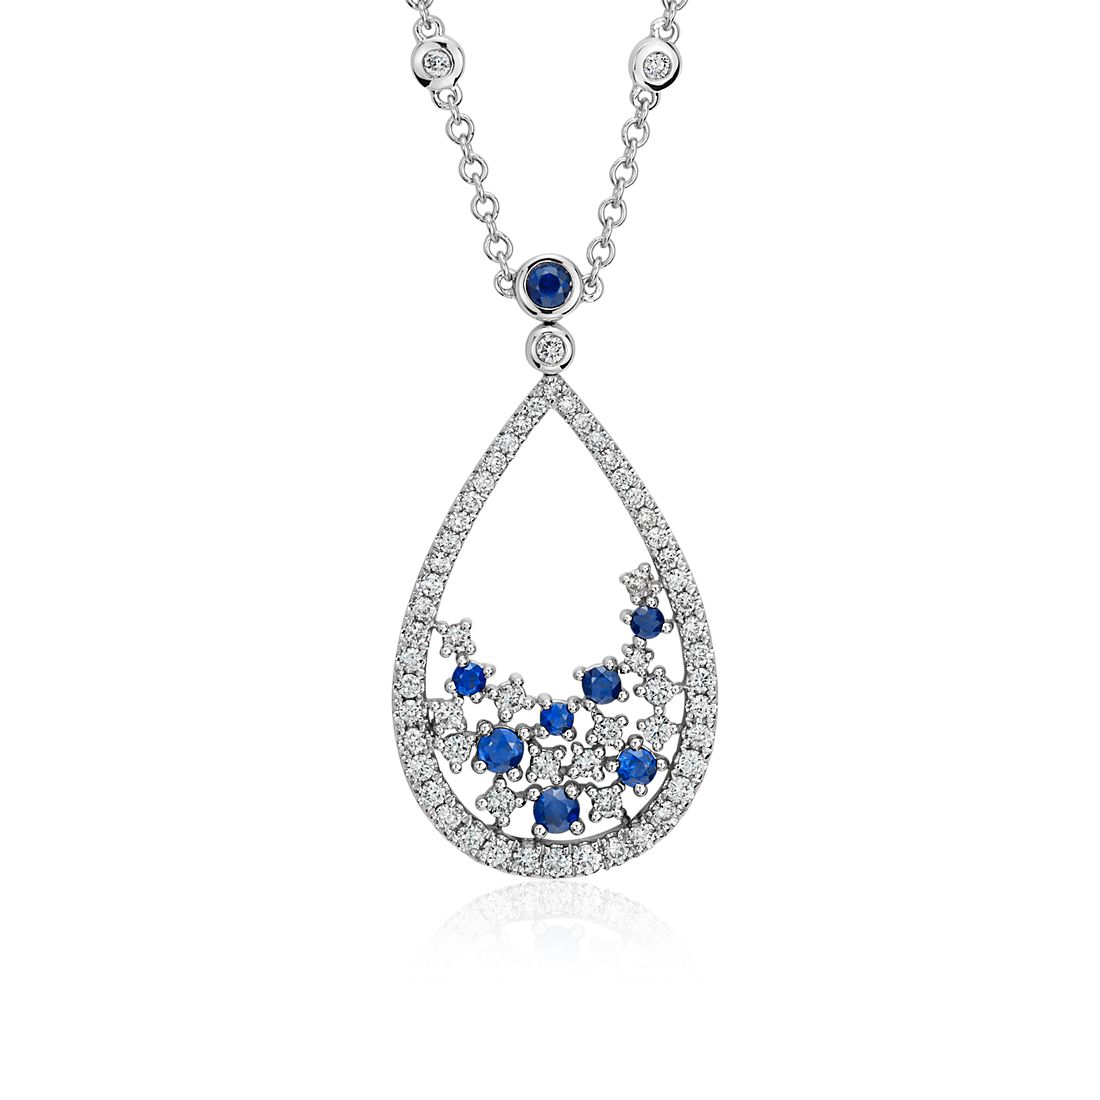 Blue Nile Studio Something Blue, Sapphire & Diamond Floral Teardrop Necklace in 18k White Gold